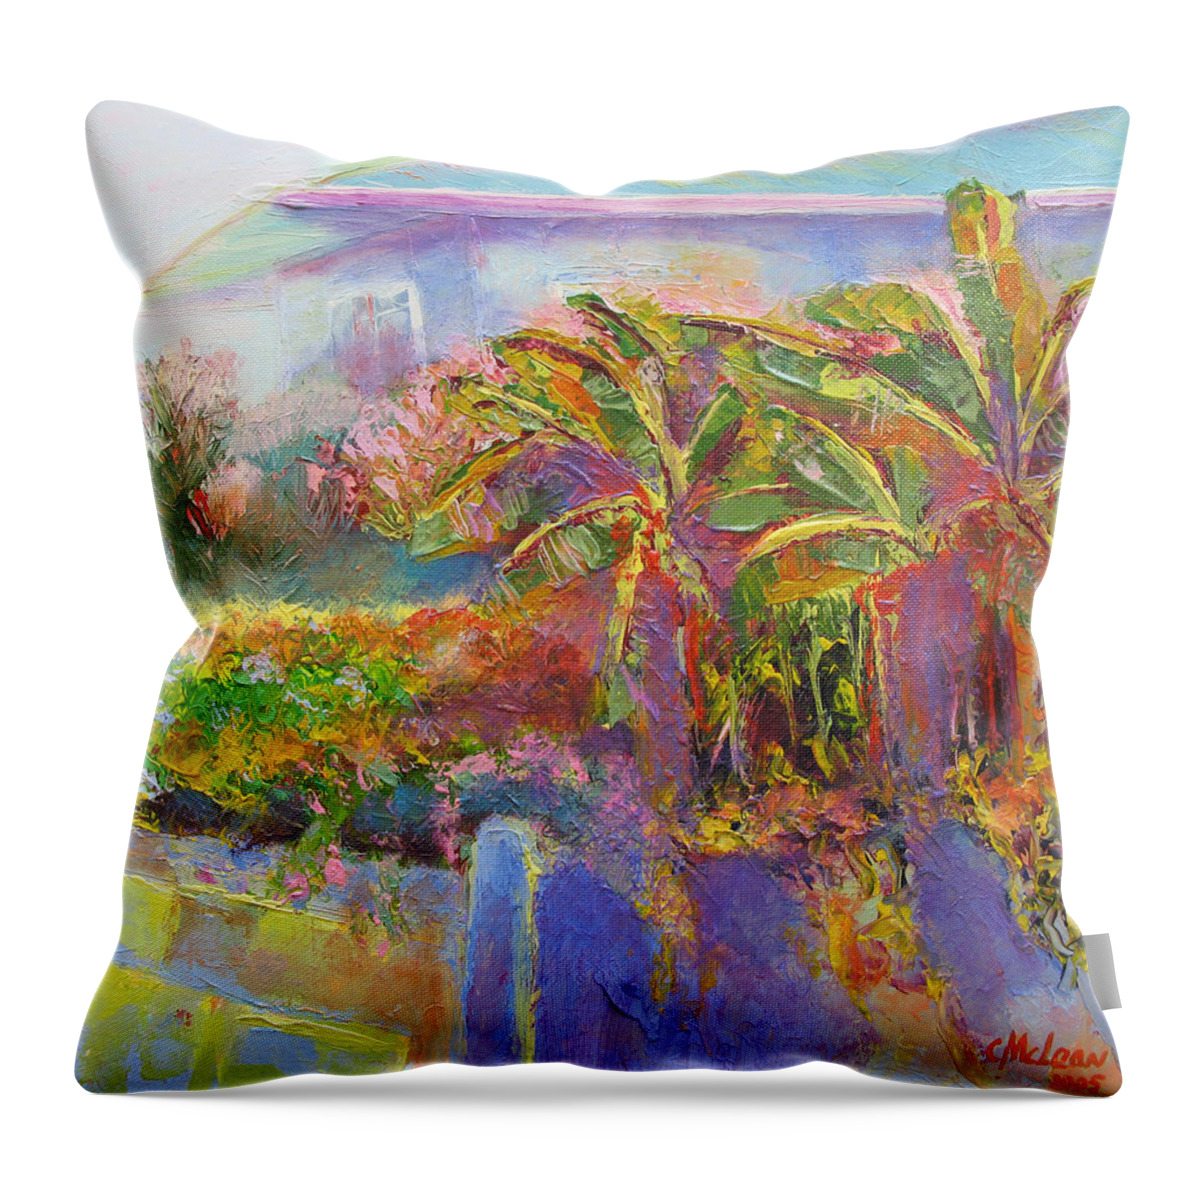 Old Throw Pillow featuring the painting Old House Garden by Cynthia McLean